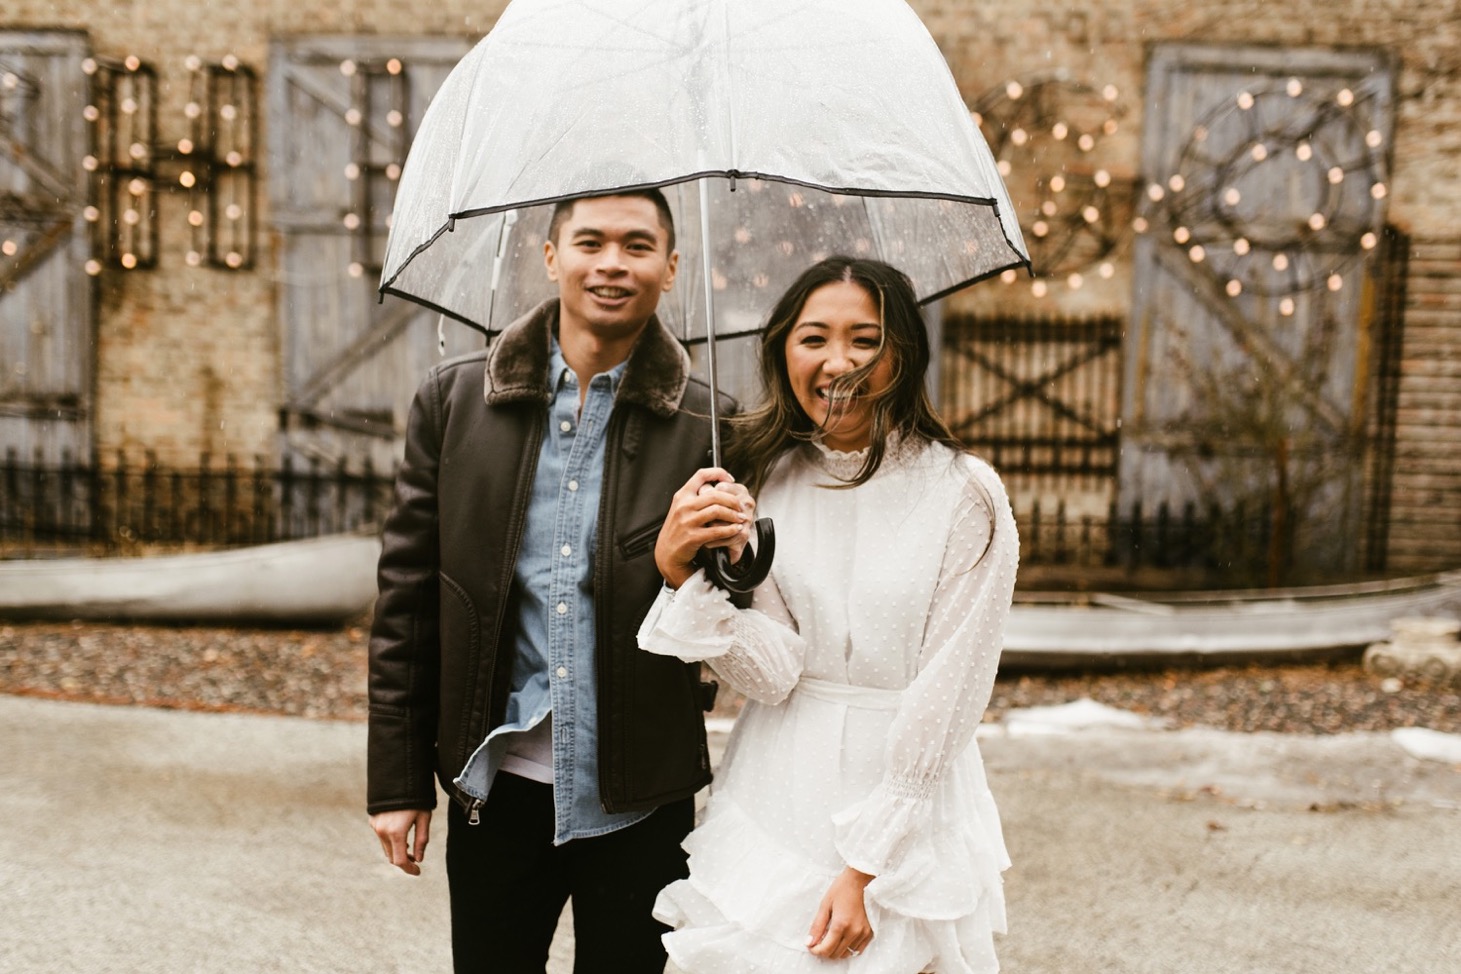 Indigo Lace Collective, Chicago Wedding Photographer, Chicago Photographer, Engagement Session, Salvage One Chicago, What to Wear for an Engagement Session, Best Engagement Session in Chicago, Indoor Engagement Session Location in Chicago, Illinois Wedding Photographer, Chicago Engagement Photographer, Industrial Engagement Session, Industrial Wedding Venue, Industrial Chicago Wedding Venue, Salvage One Wedding, Salvage One Engagement, Moody Engagement Session, Rainy Day Engagement Session